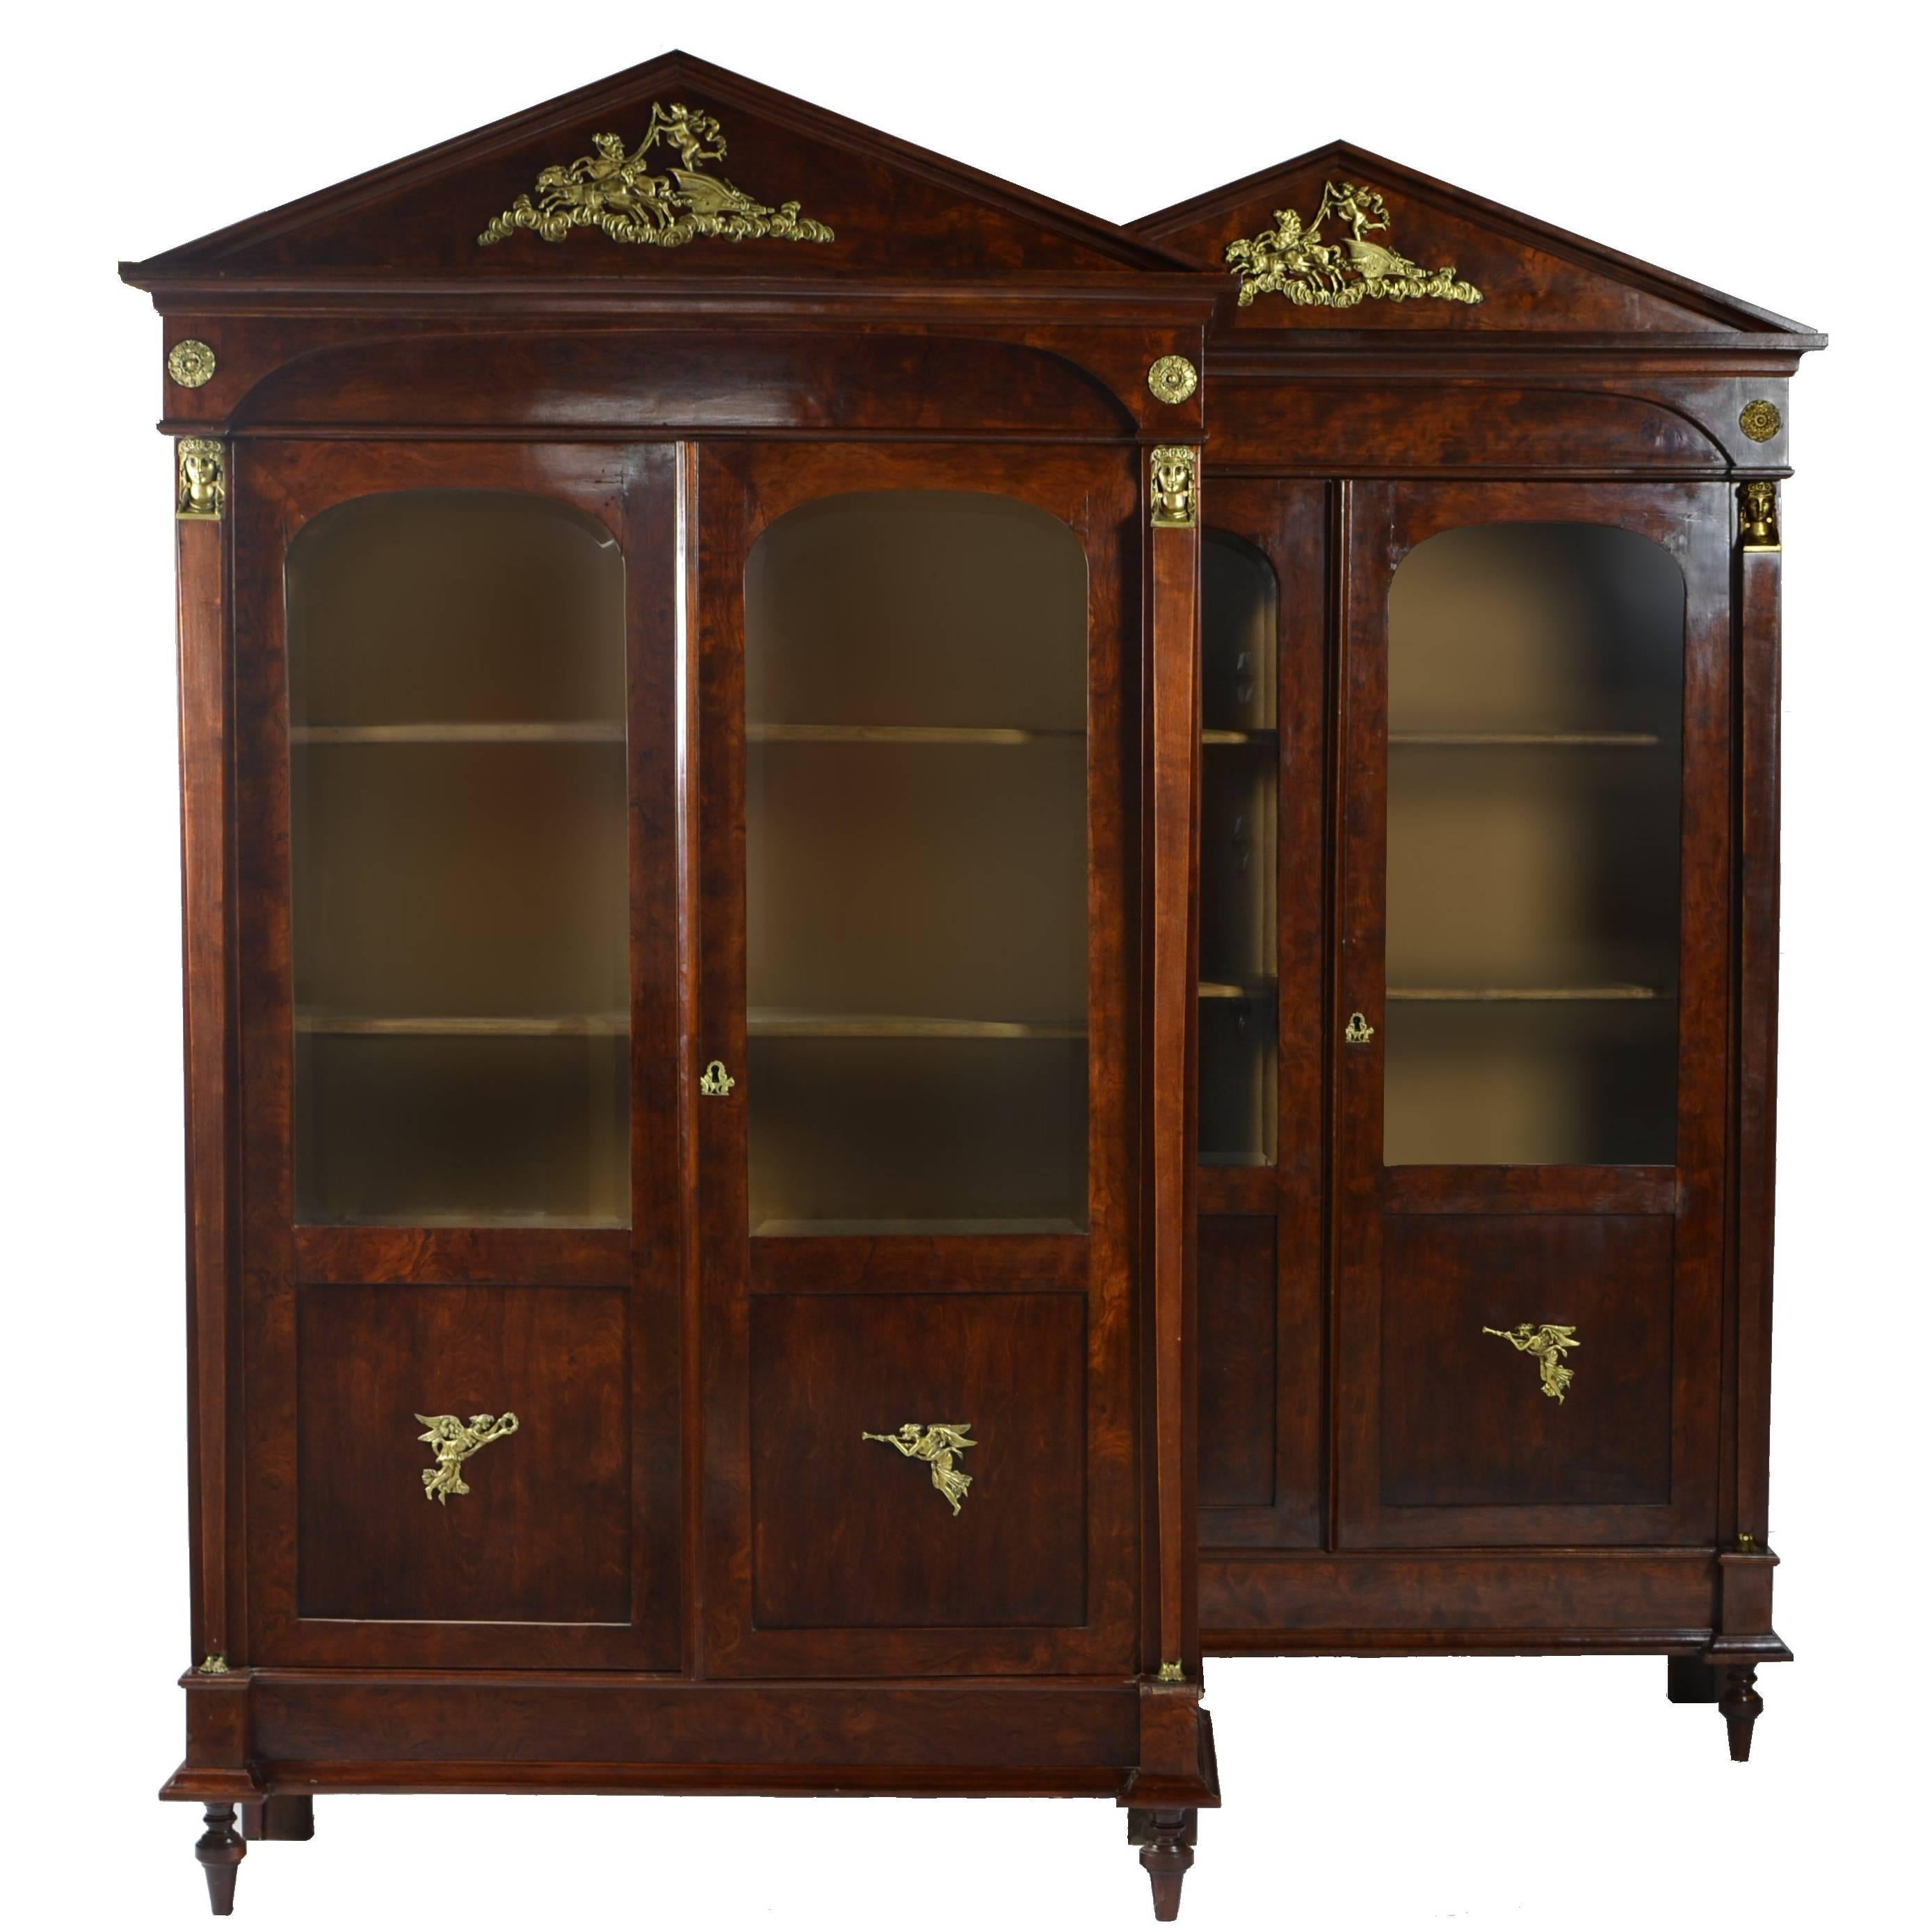 Early 19th Century Empire Style Matching Bookcases